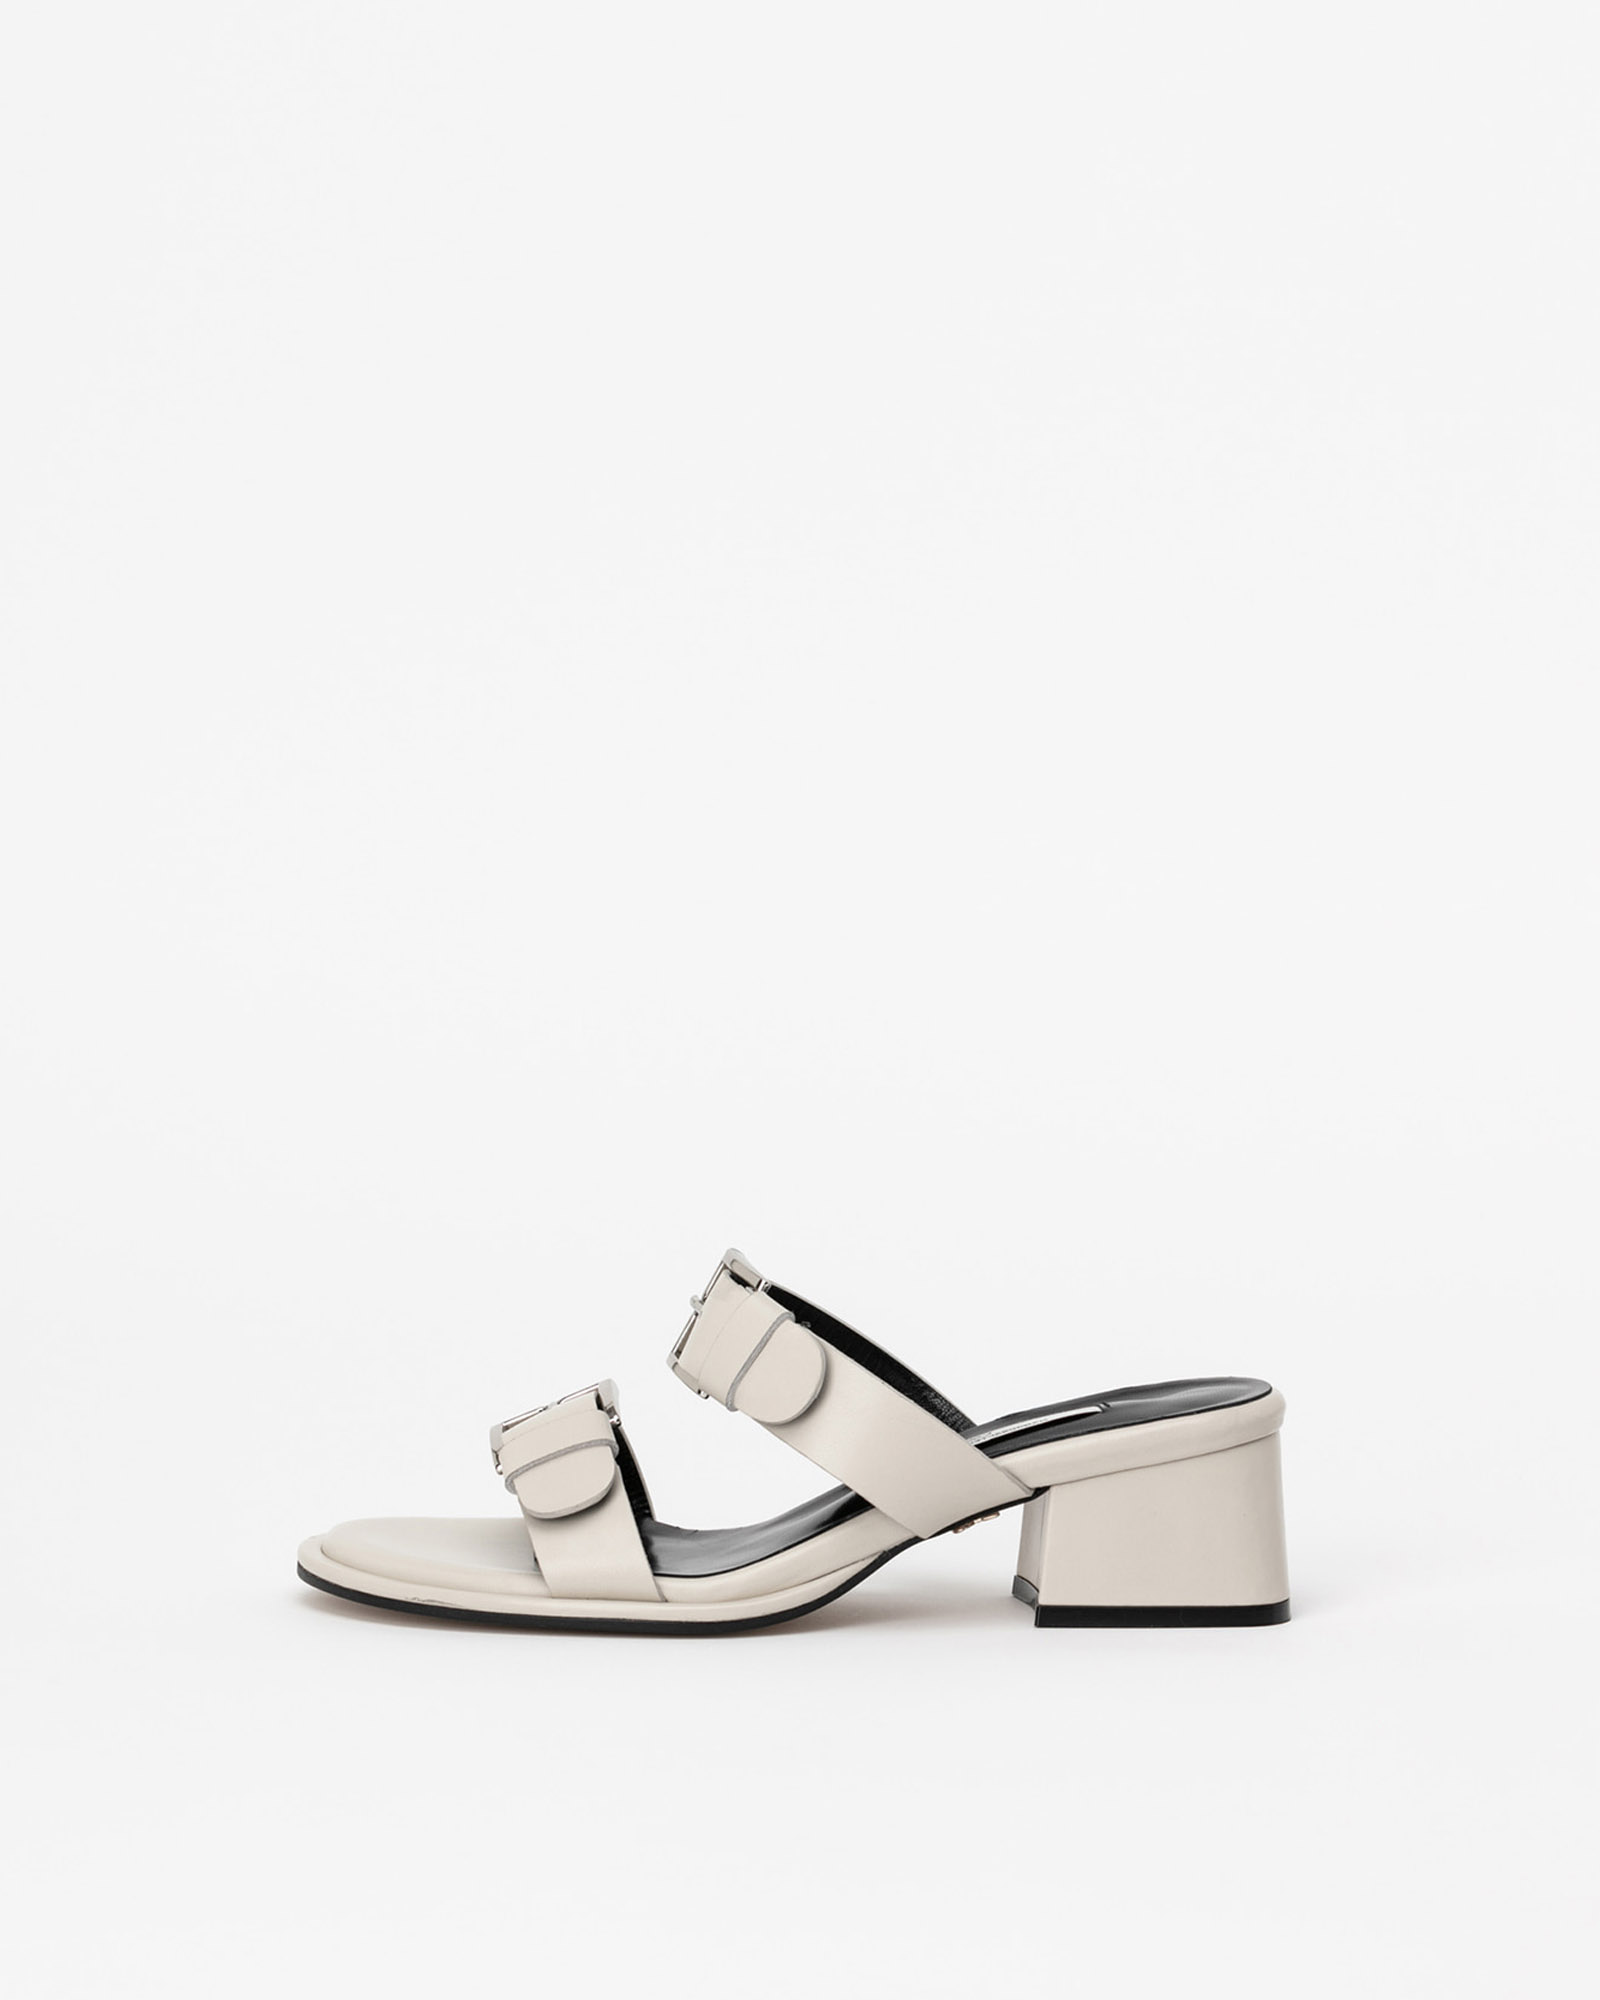 Duebuck Buckled Mule Sandals in Ivory